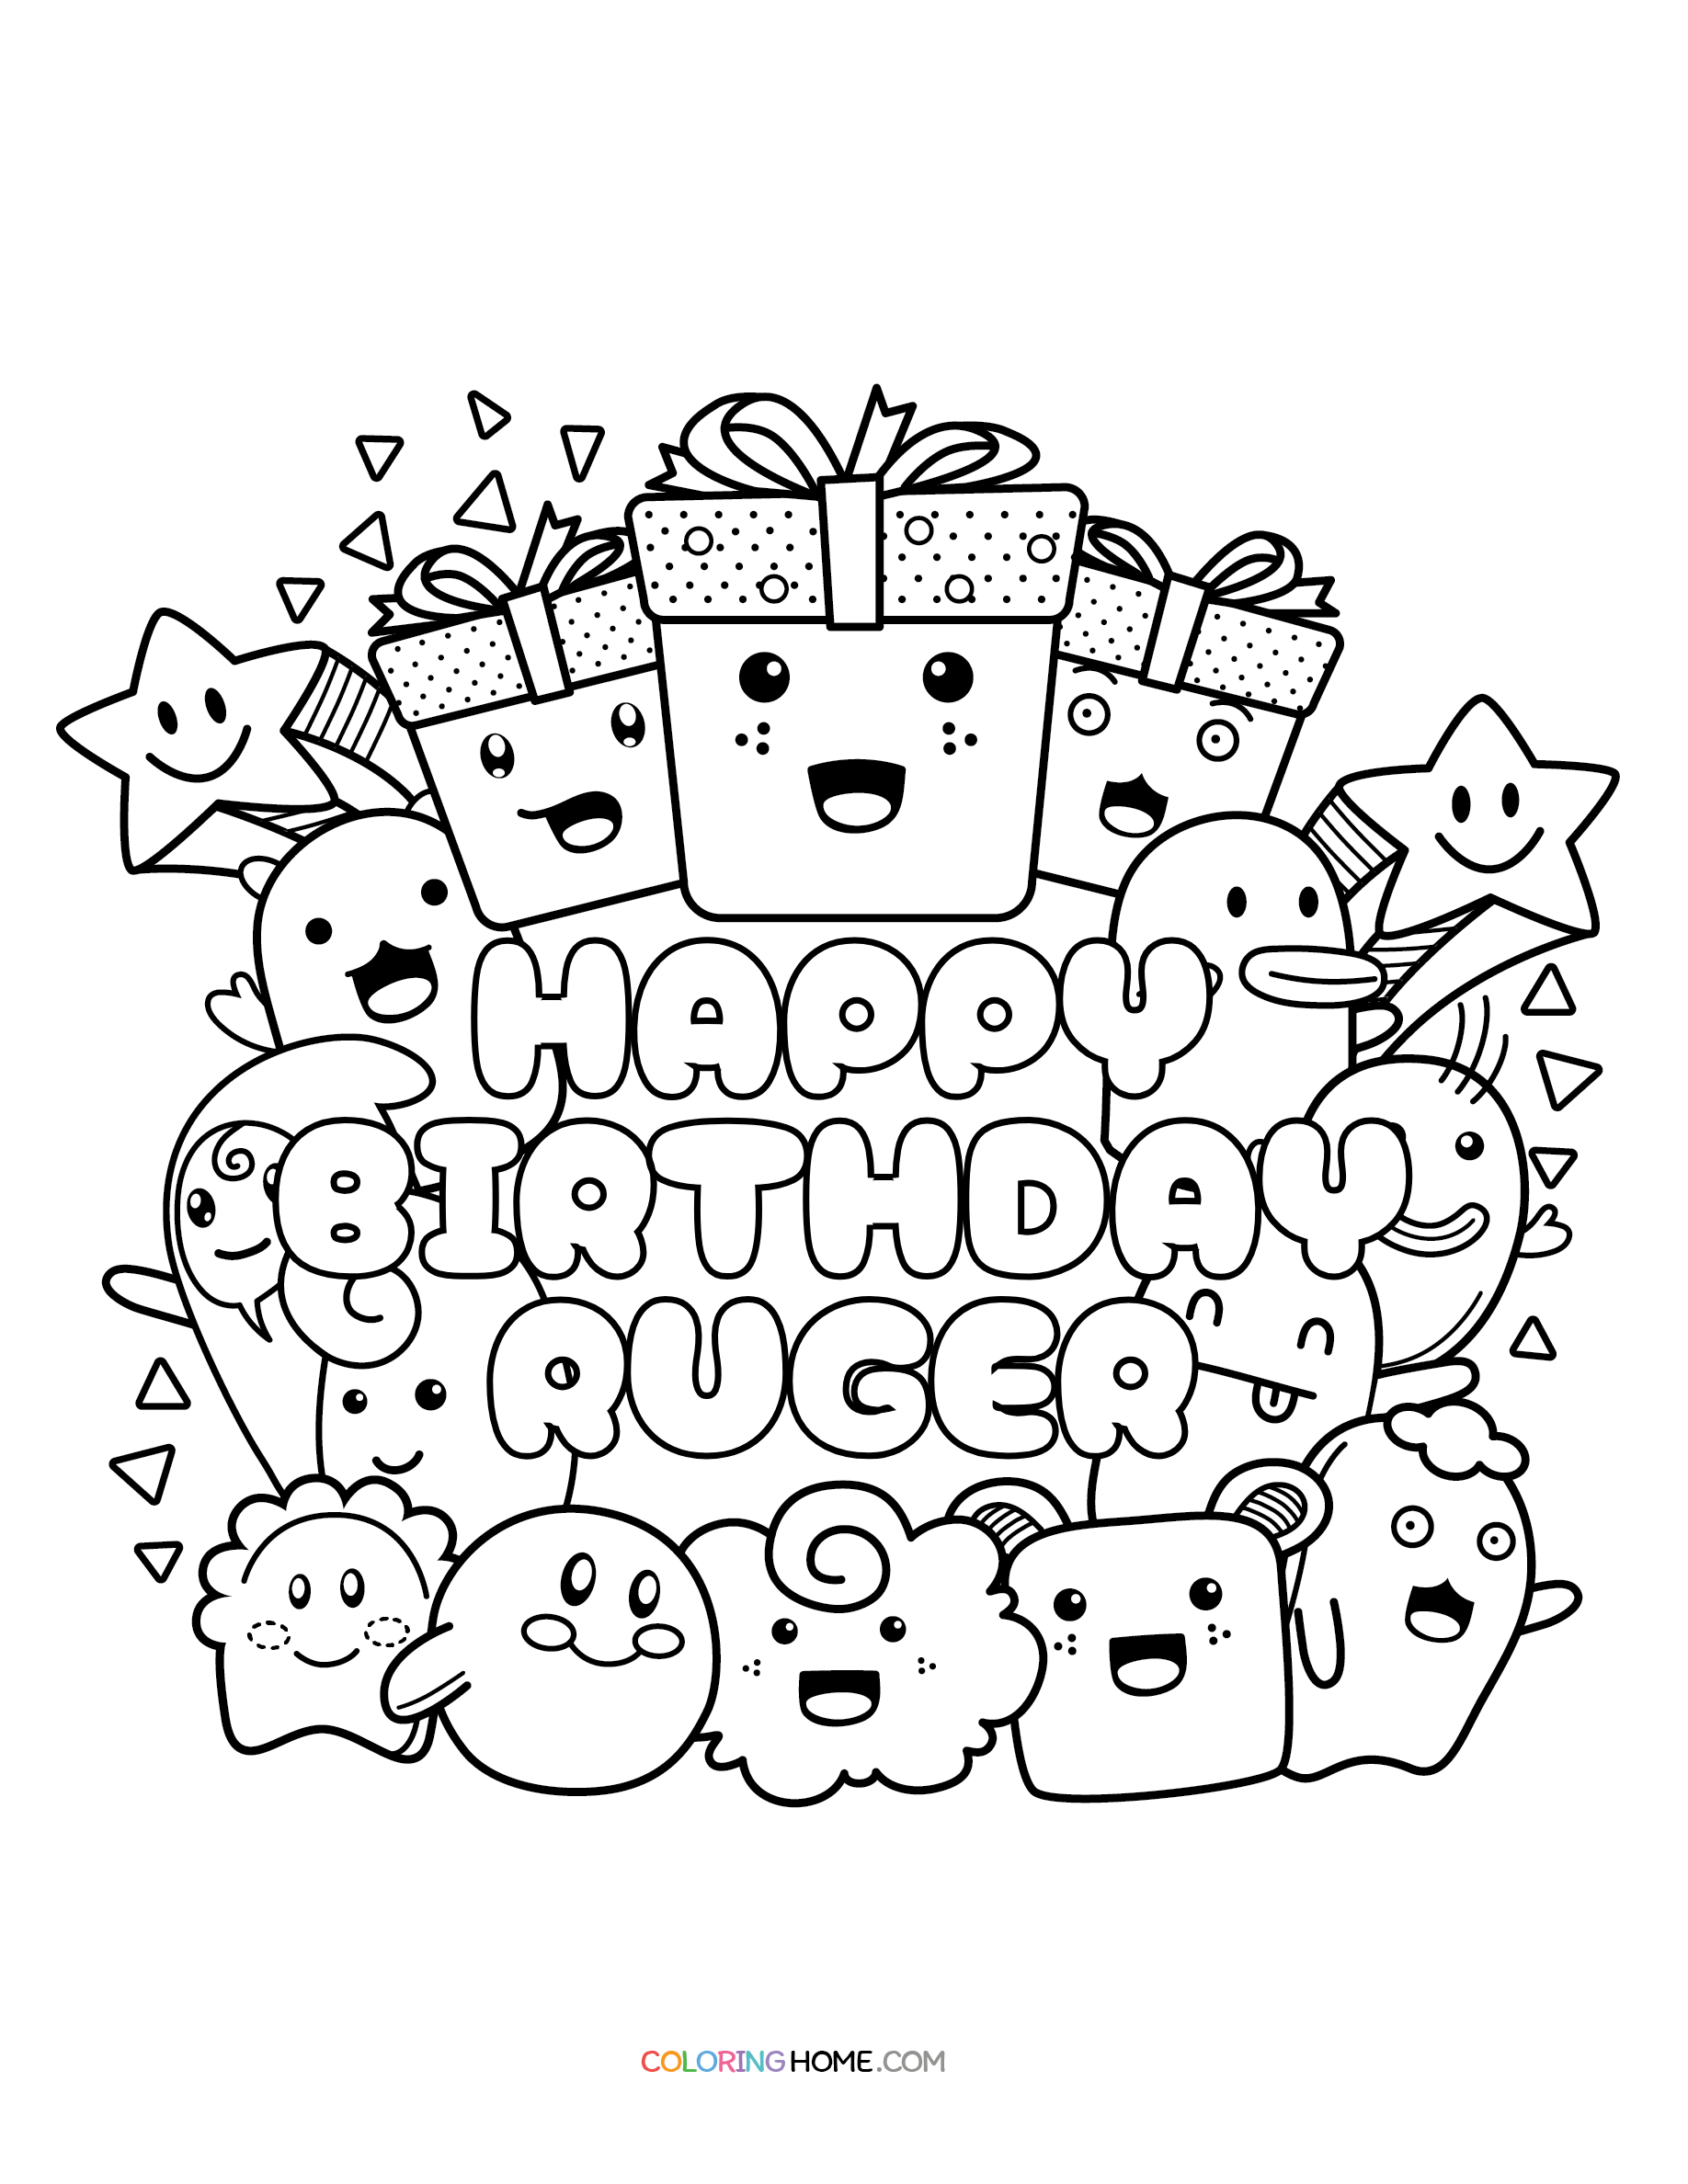 Happy Birthday Ruger coloring page